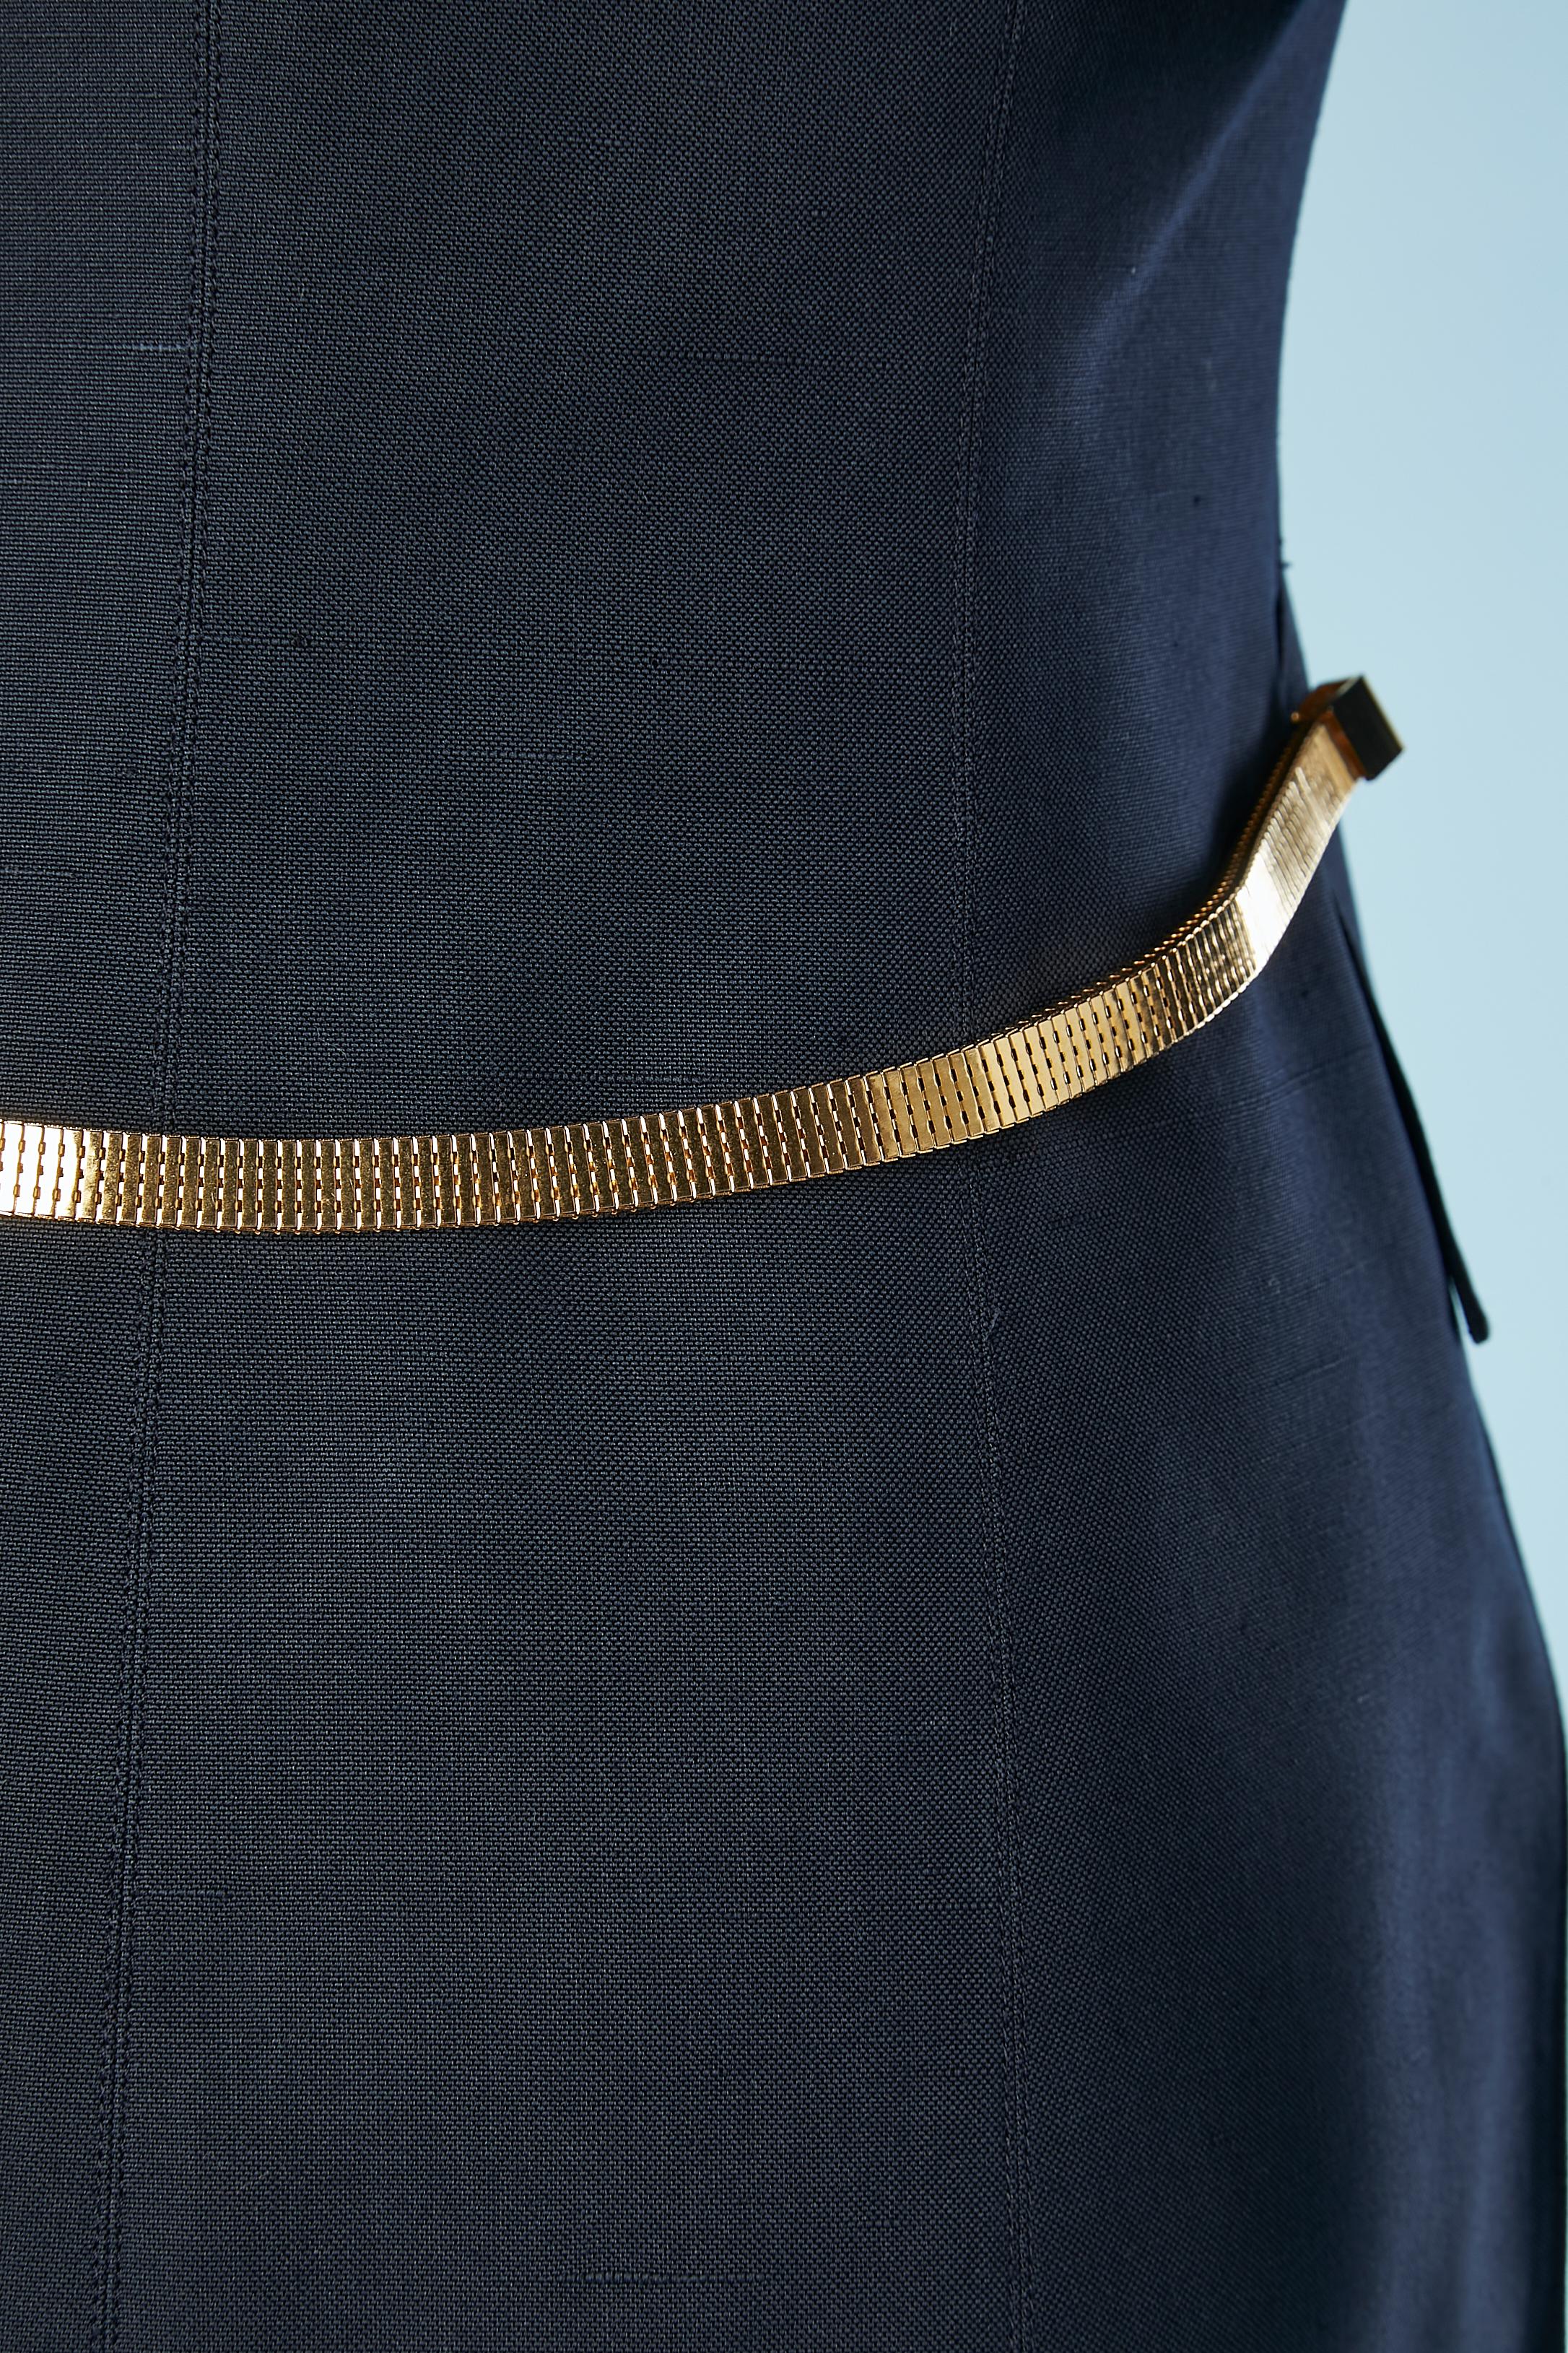 Navy-blue raw silk and cotton cocktail ensemble with gold metal buttons Montana For Sale 2